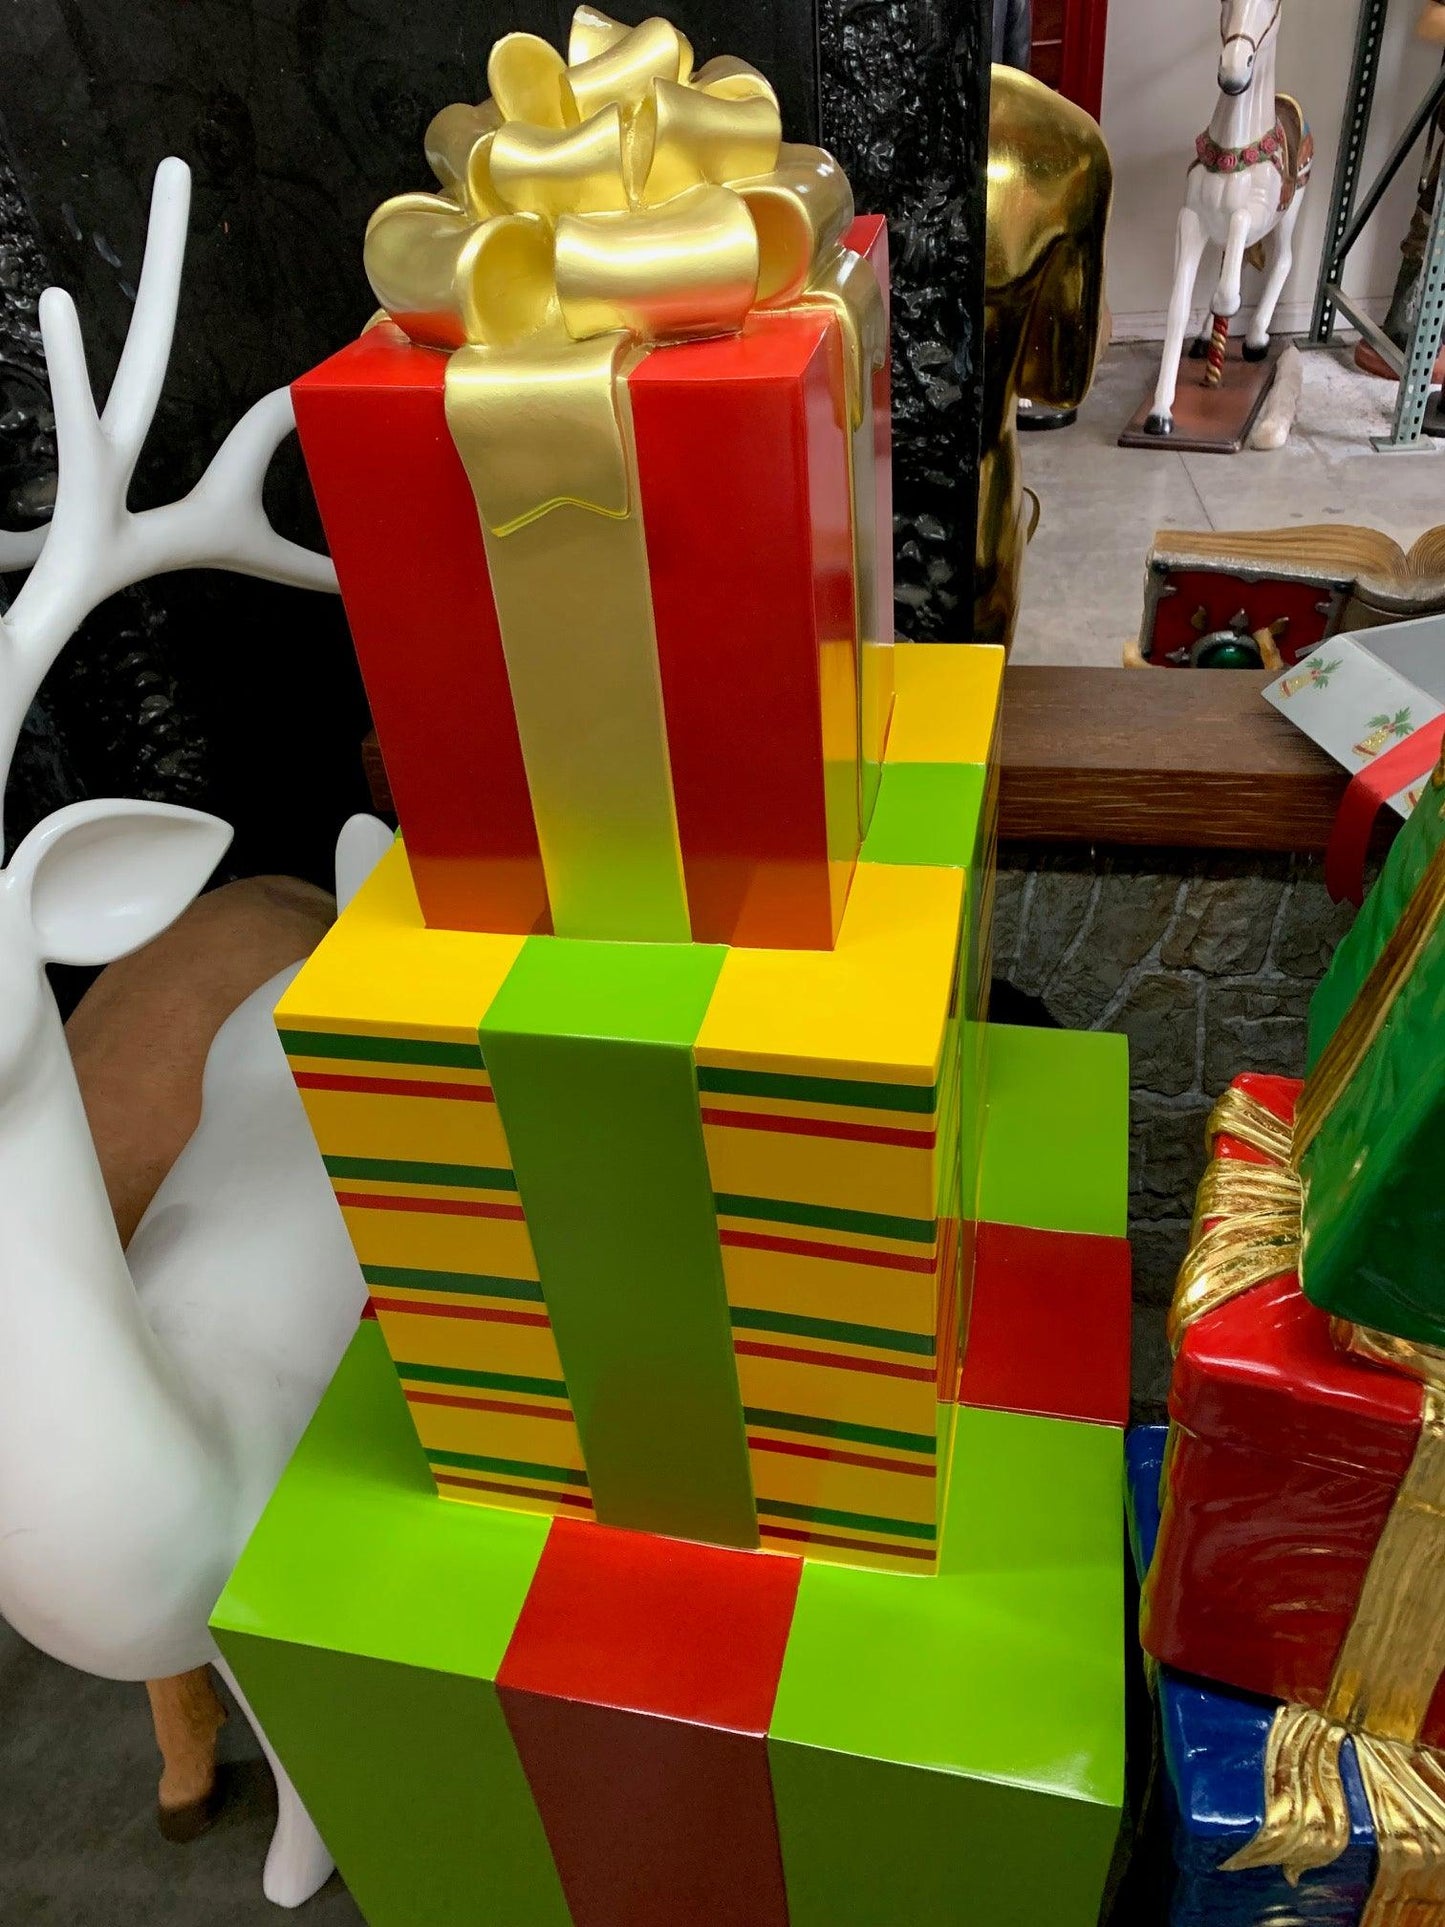 Stacked Gifts Over Sized Statue - LM Treasures Prop Rentals 